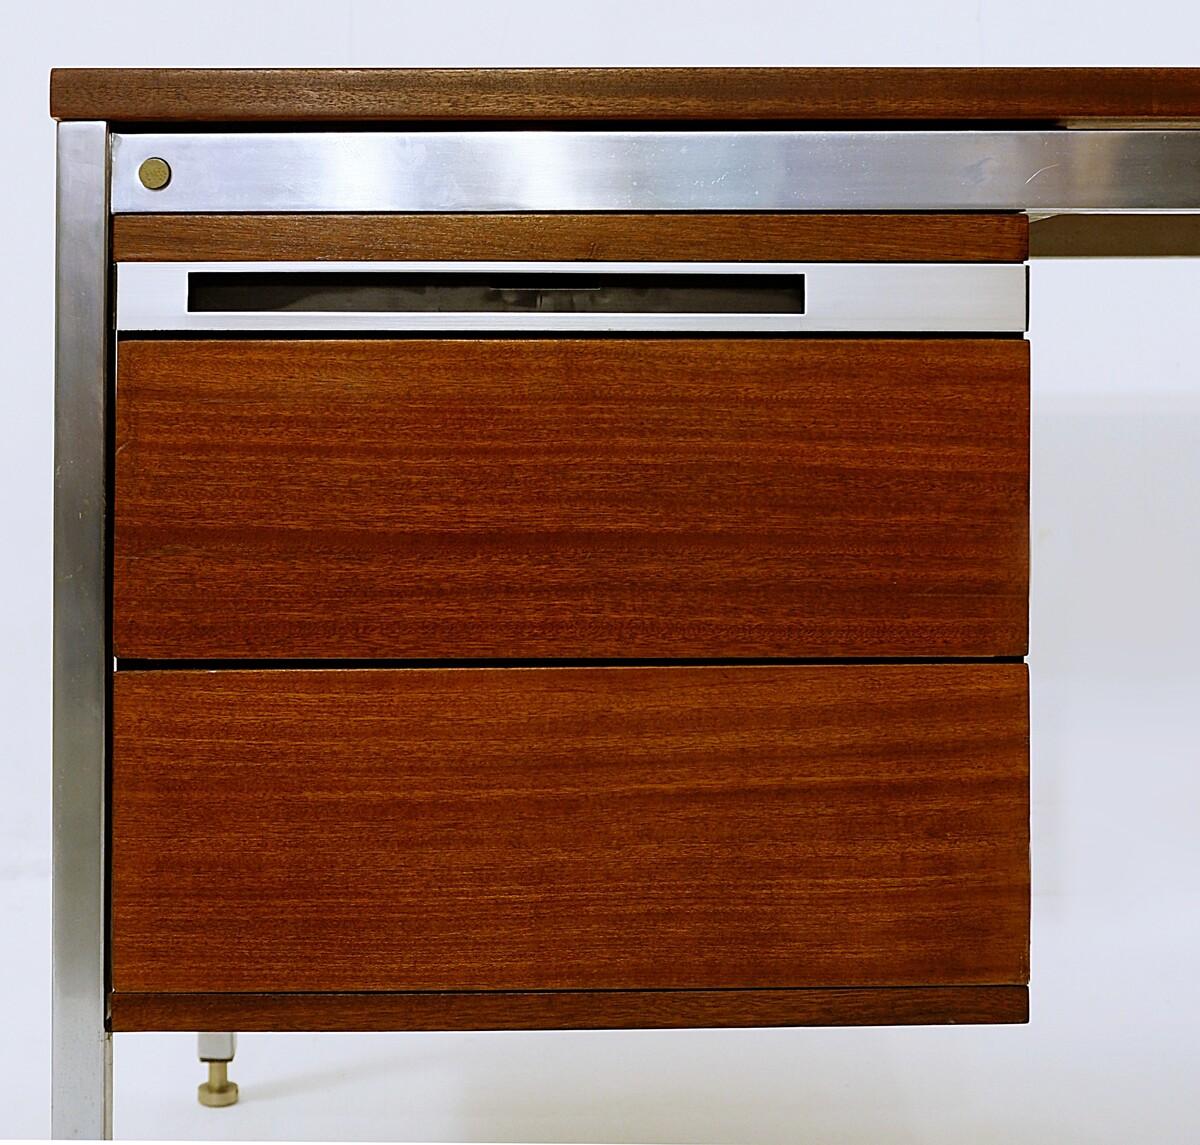 Desk by Pierre Guariche made in France in the 60s.